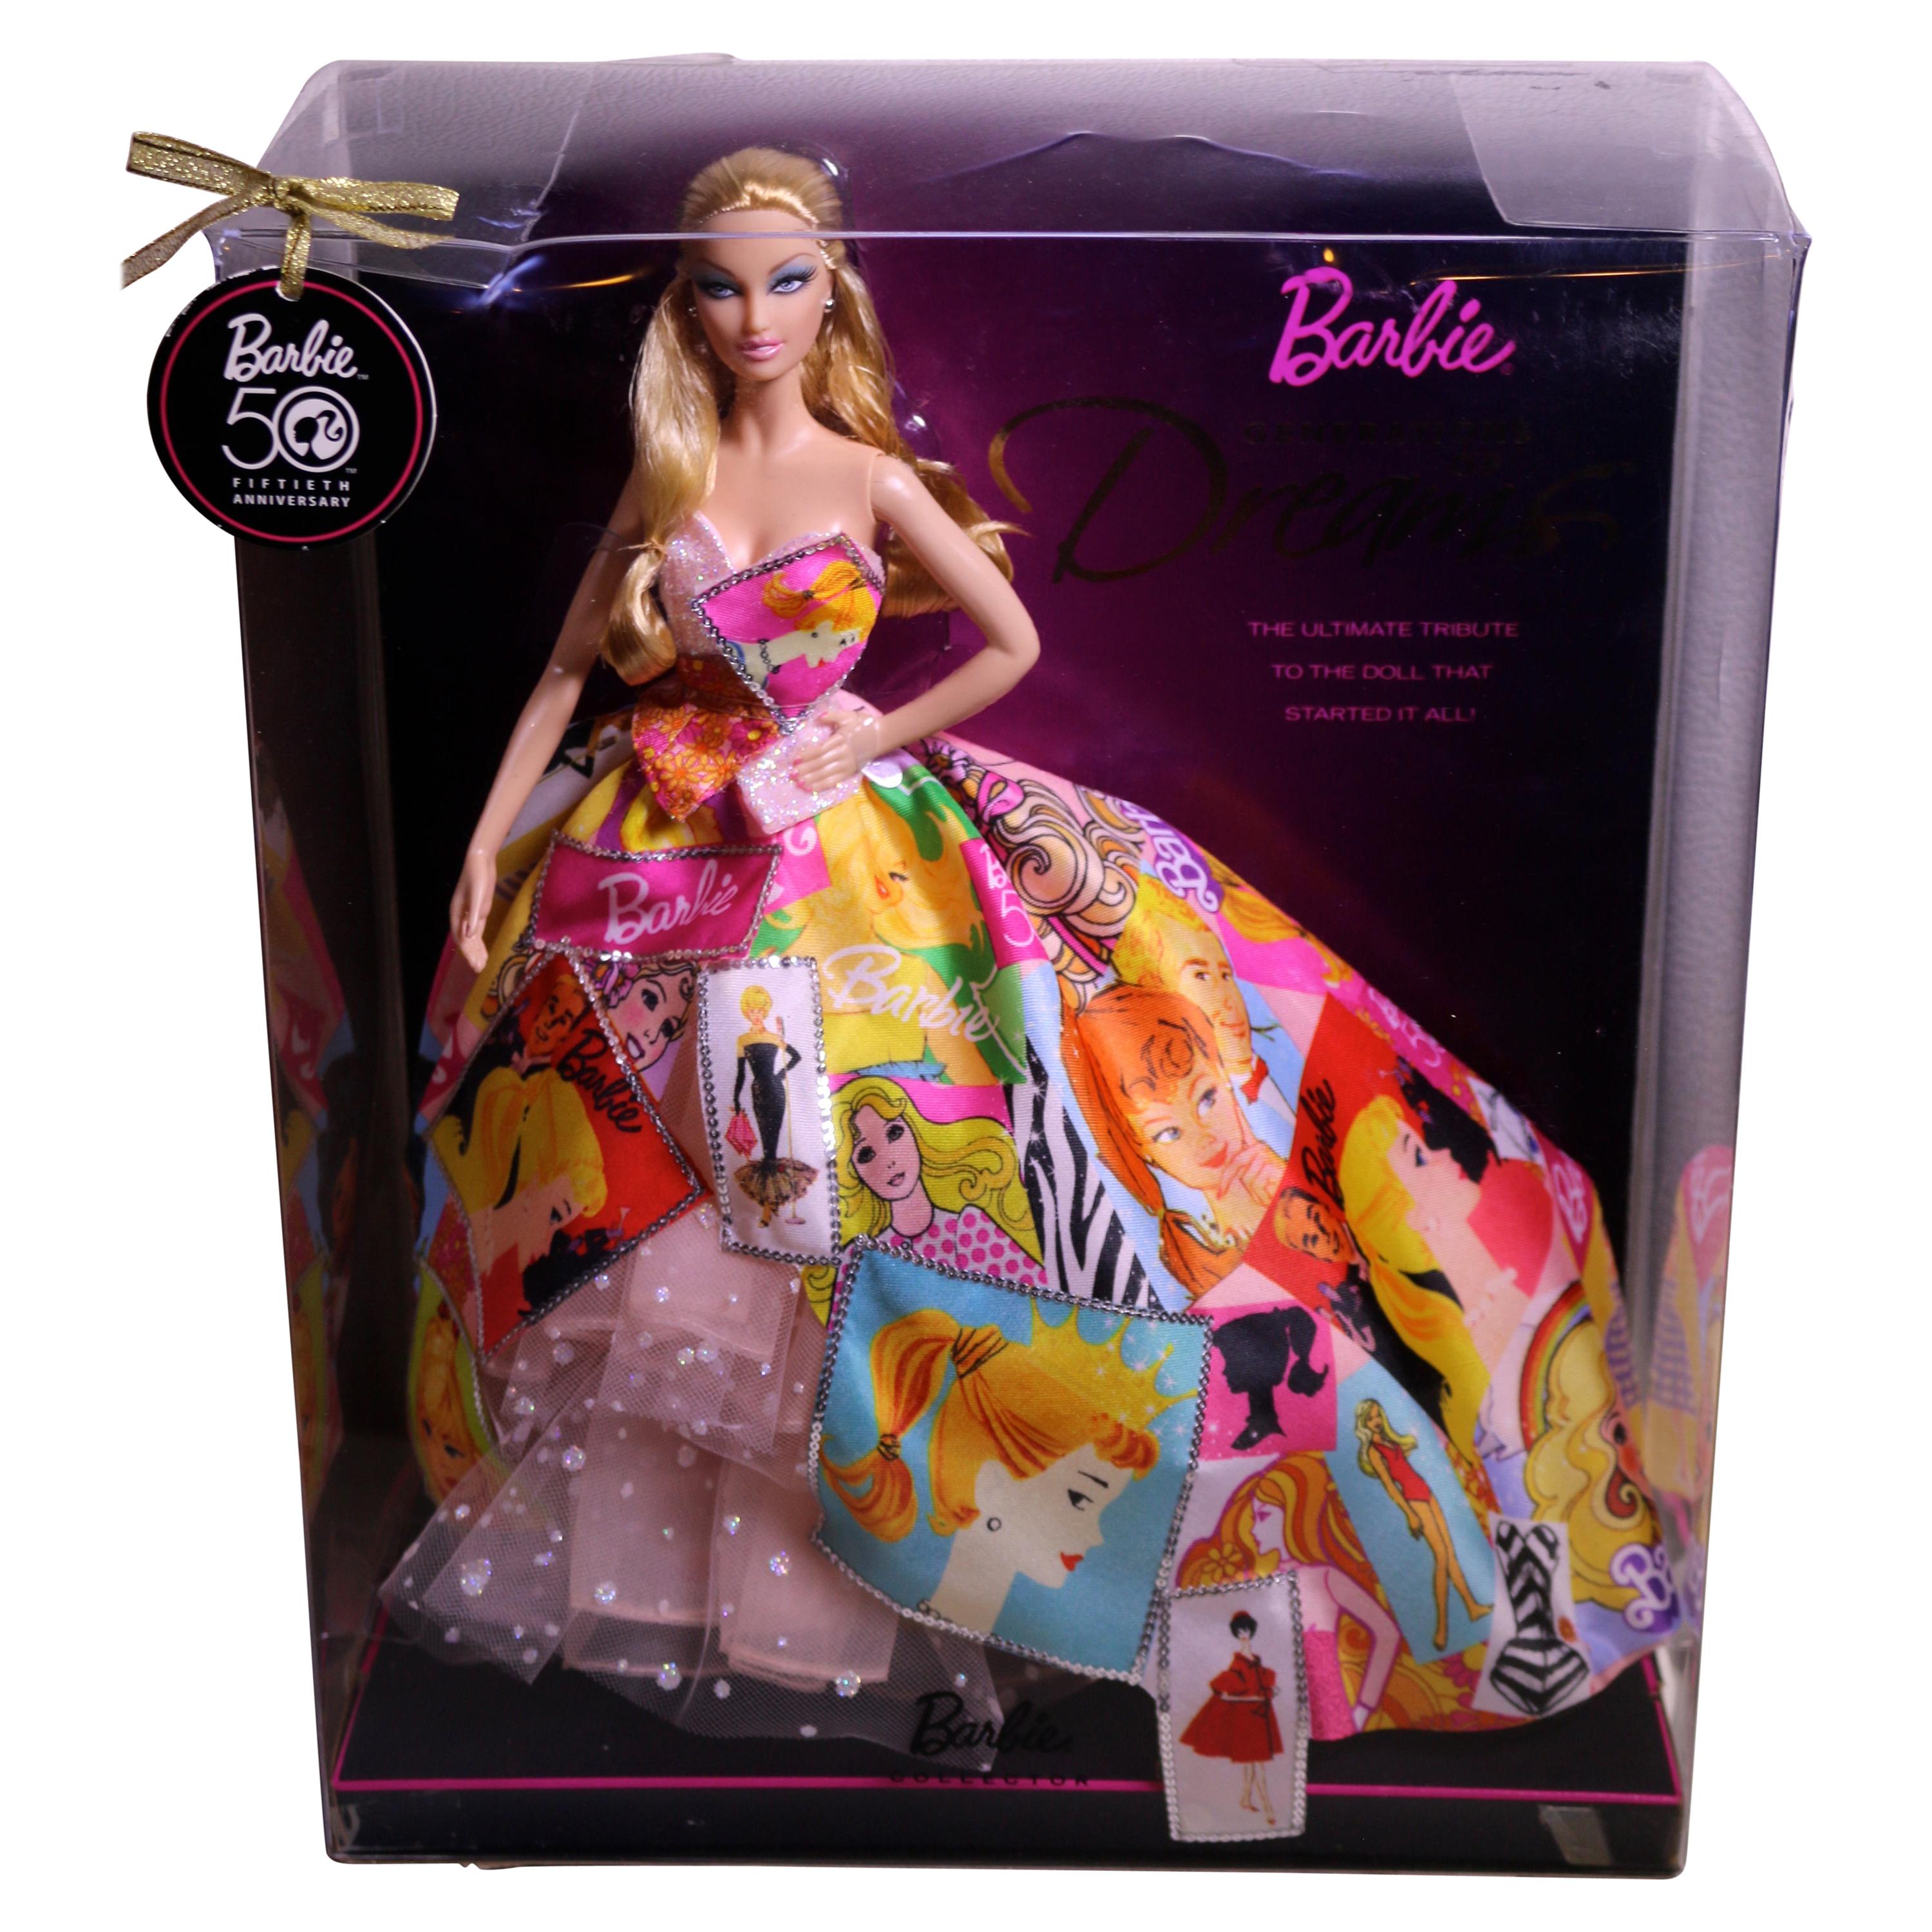 Barbie, Generation of Dreams Doll For Sale